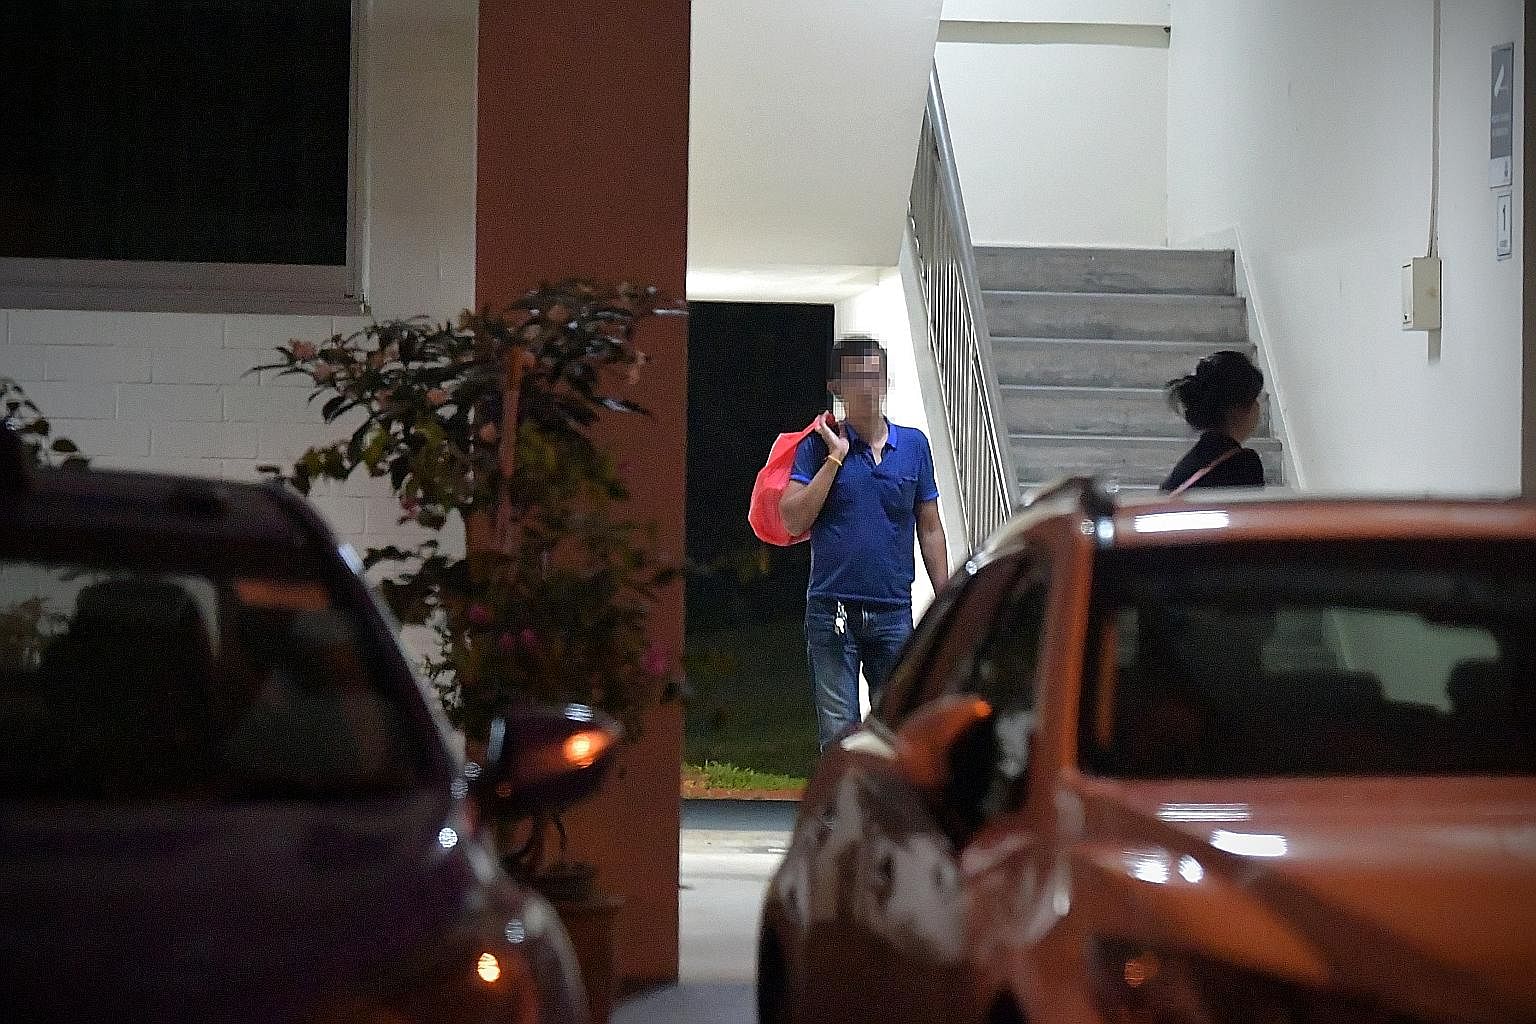 A photo taken last October of a man carrying a bag of duty-unpaid cigarettes he had just bought. Contraband cigarette touts have become harder to spot now due to a cigarette supply shortage.